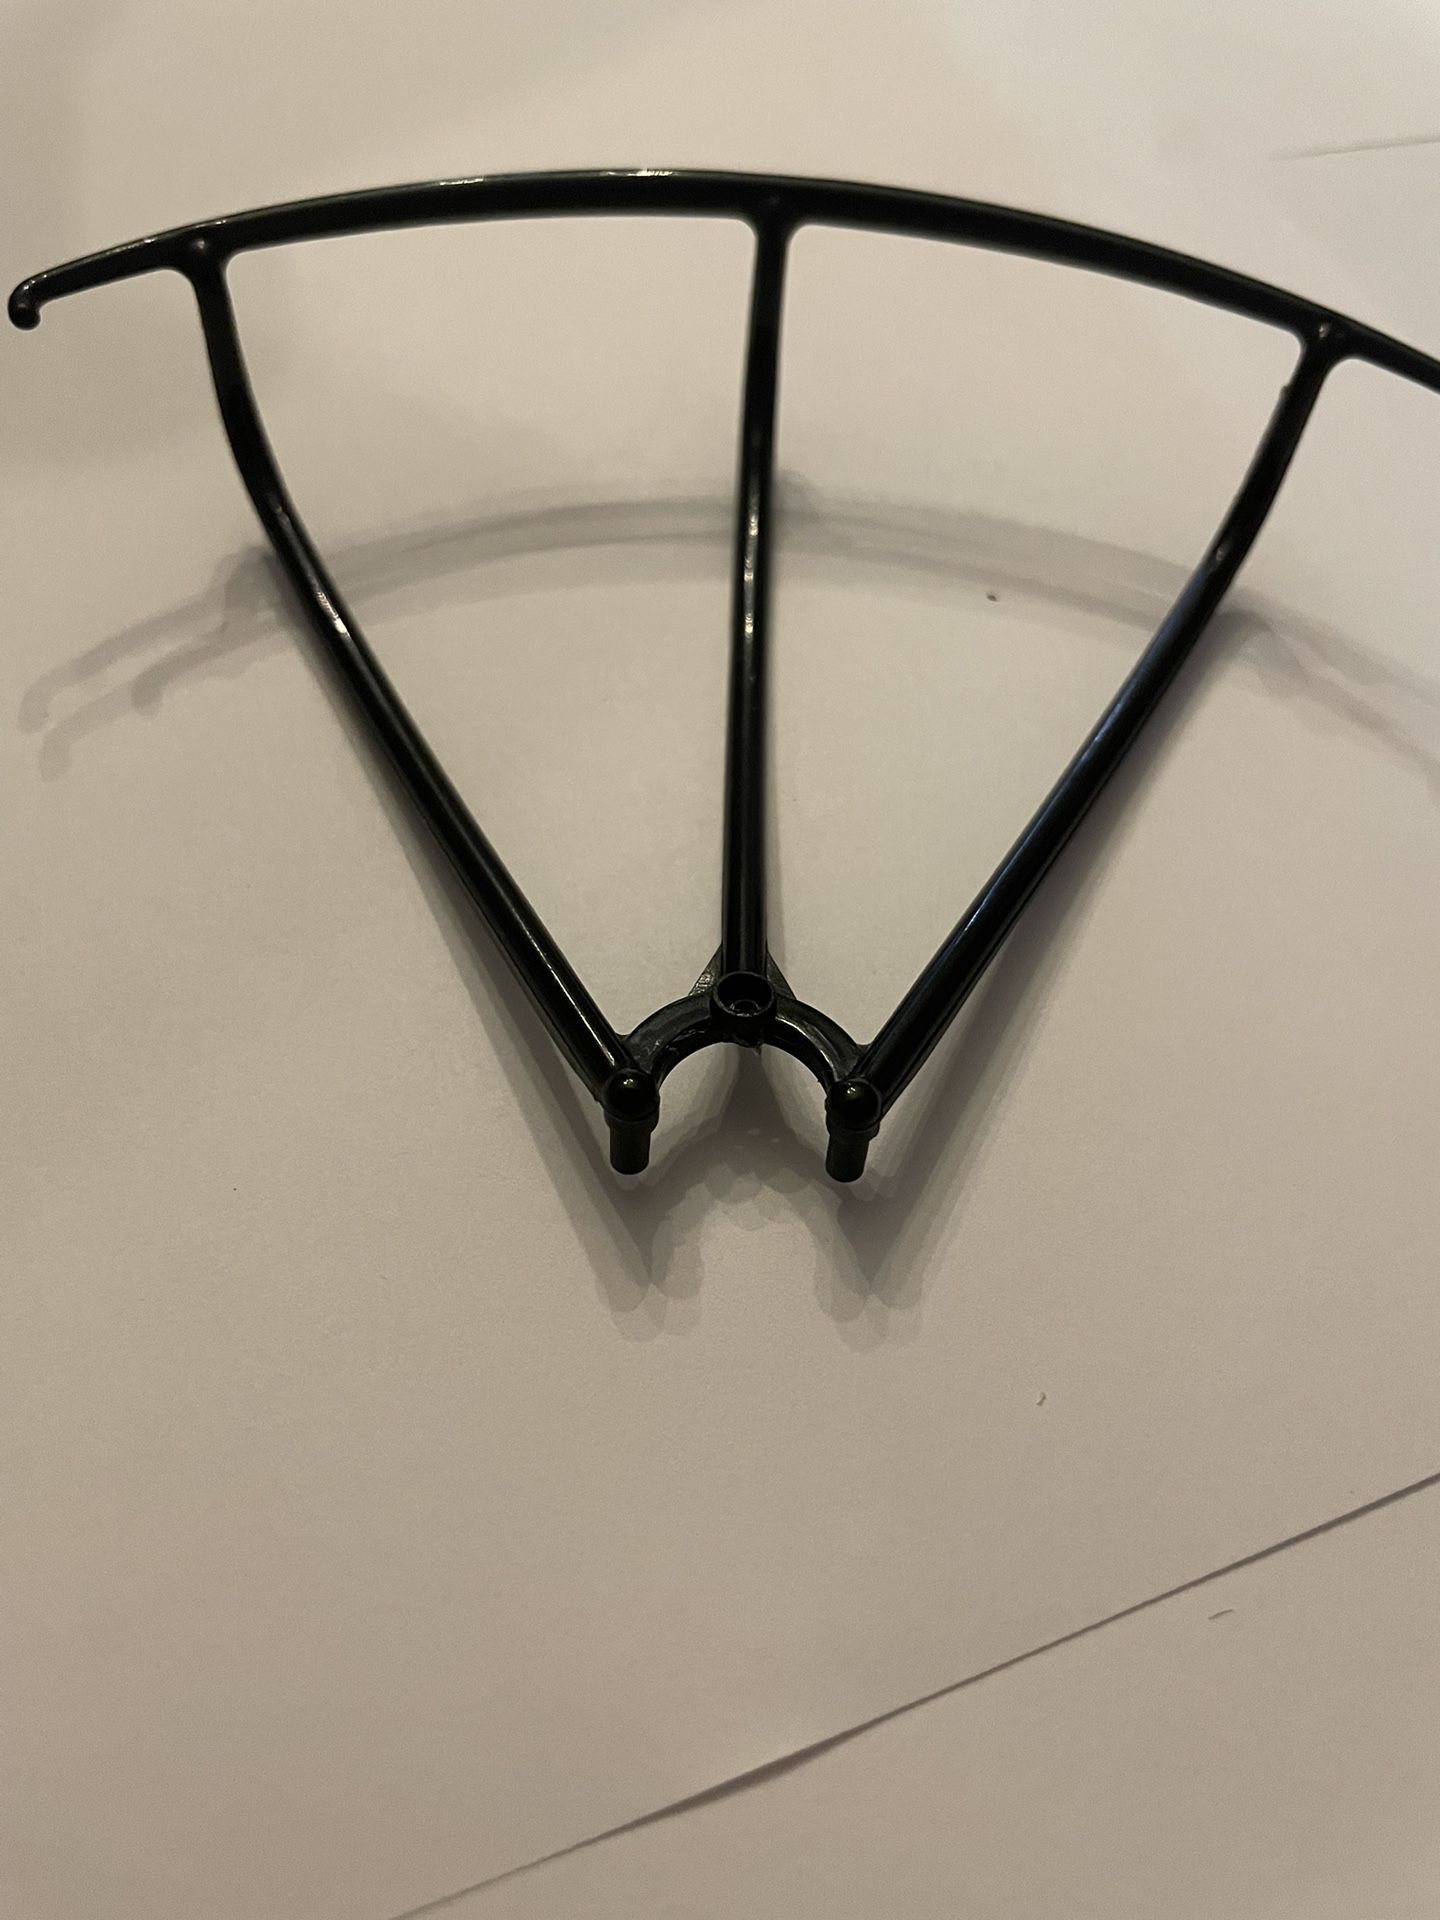 Drone Propeller Guards